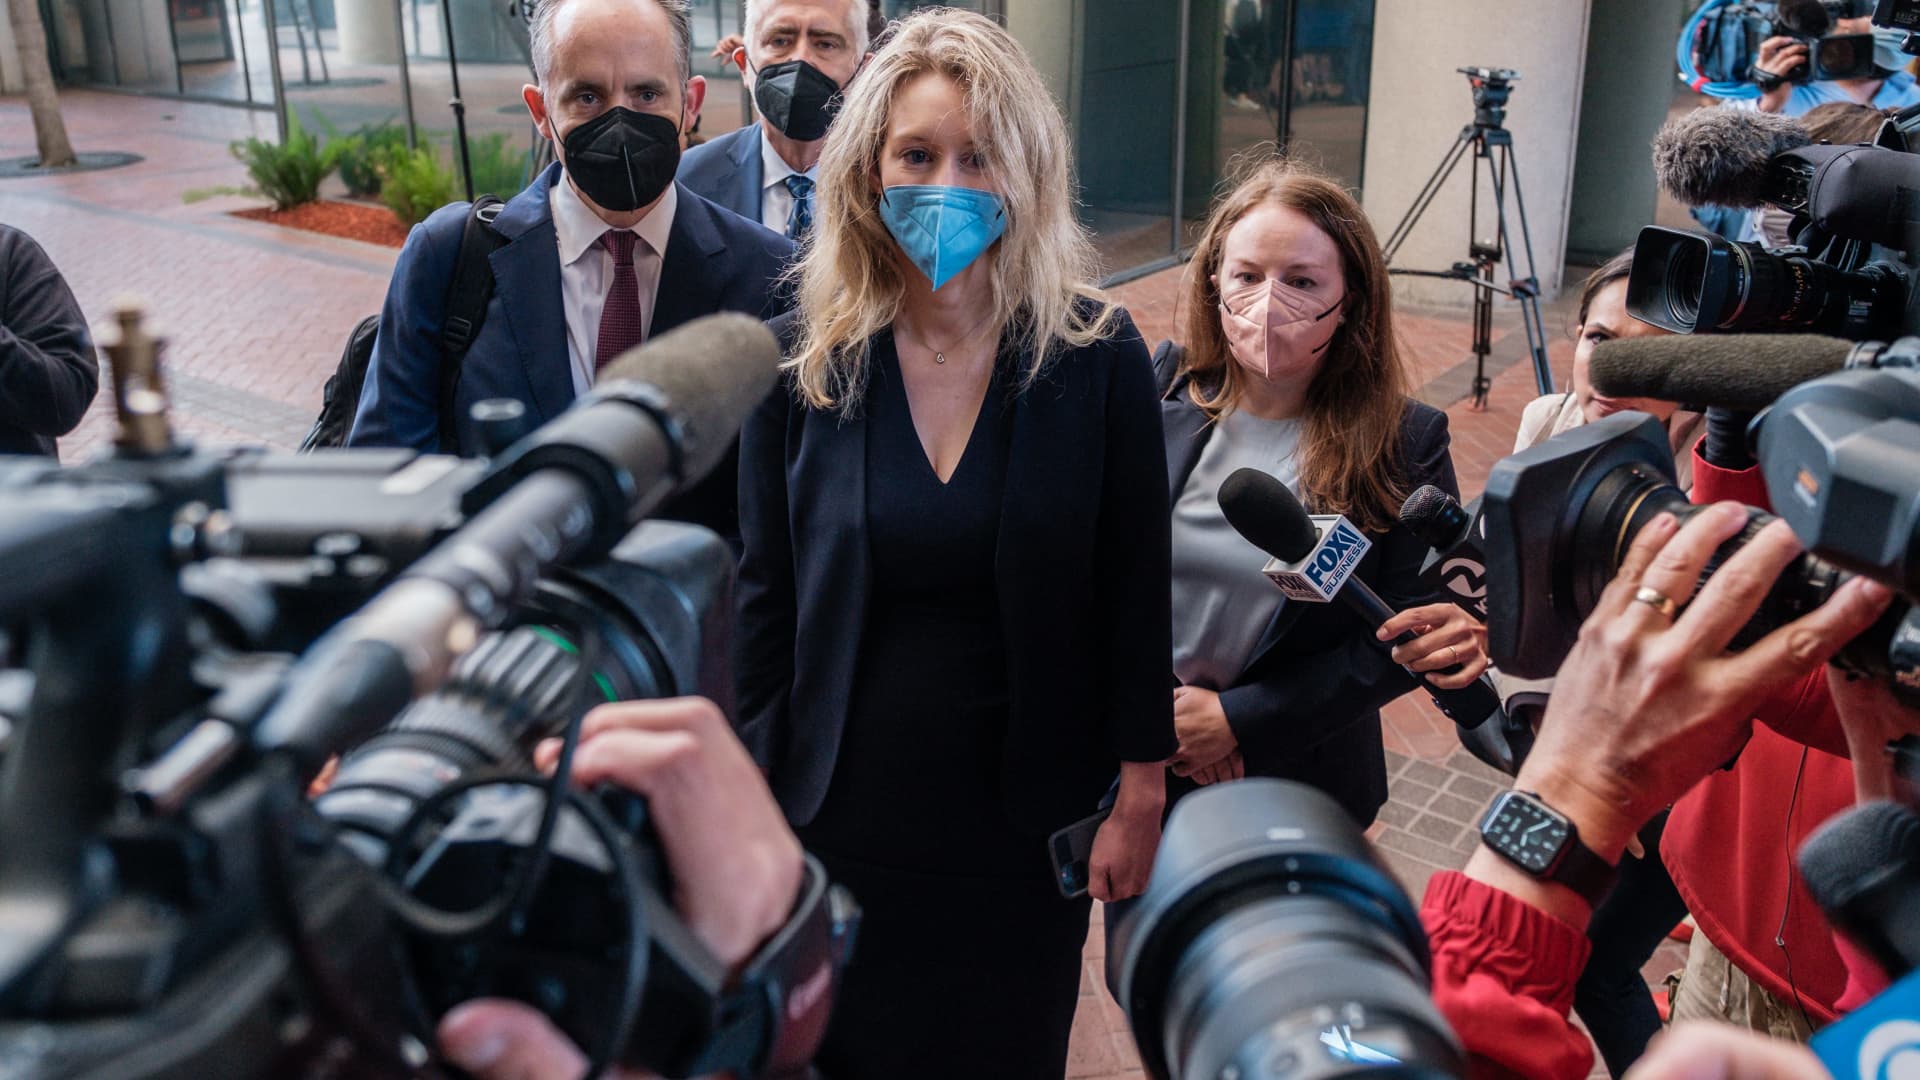 Elizabeth Holmes, the founder and former CEO of blood testing and life sciences company Theranos, arrives for the first day of jury selection in her fraud trial, outside Federal Court in San Jose, California on August 31, 2021.